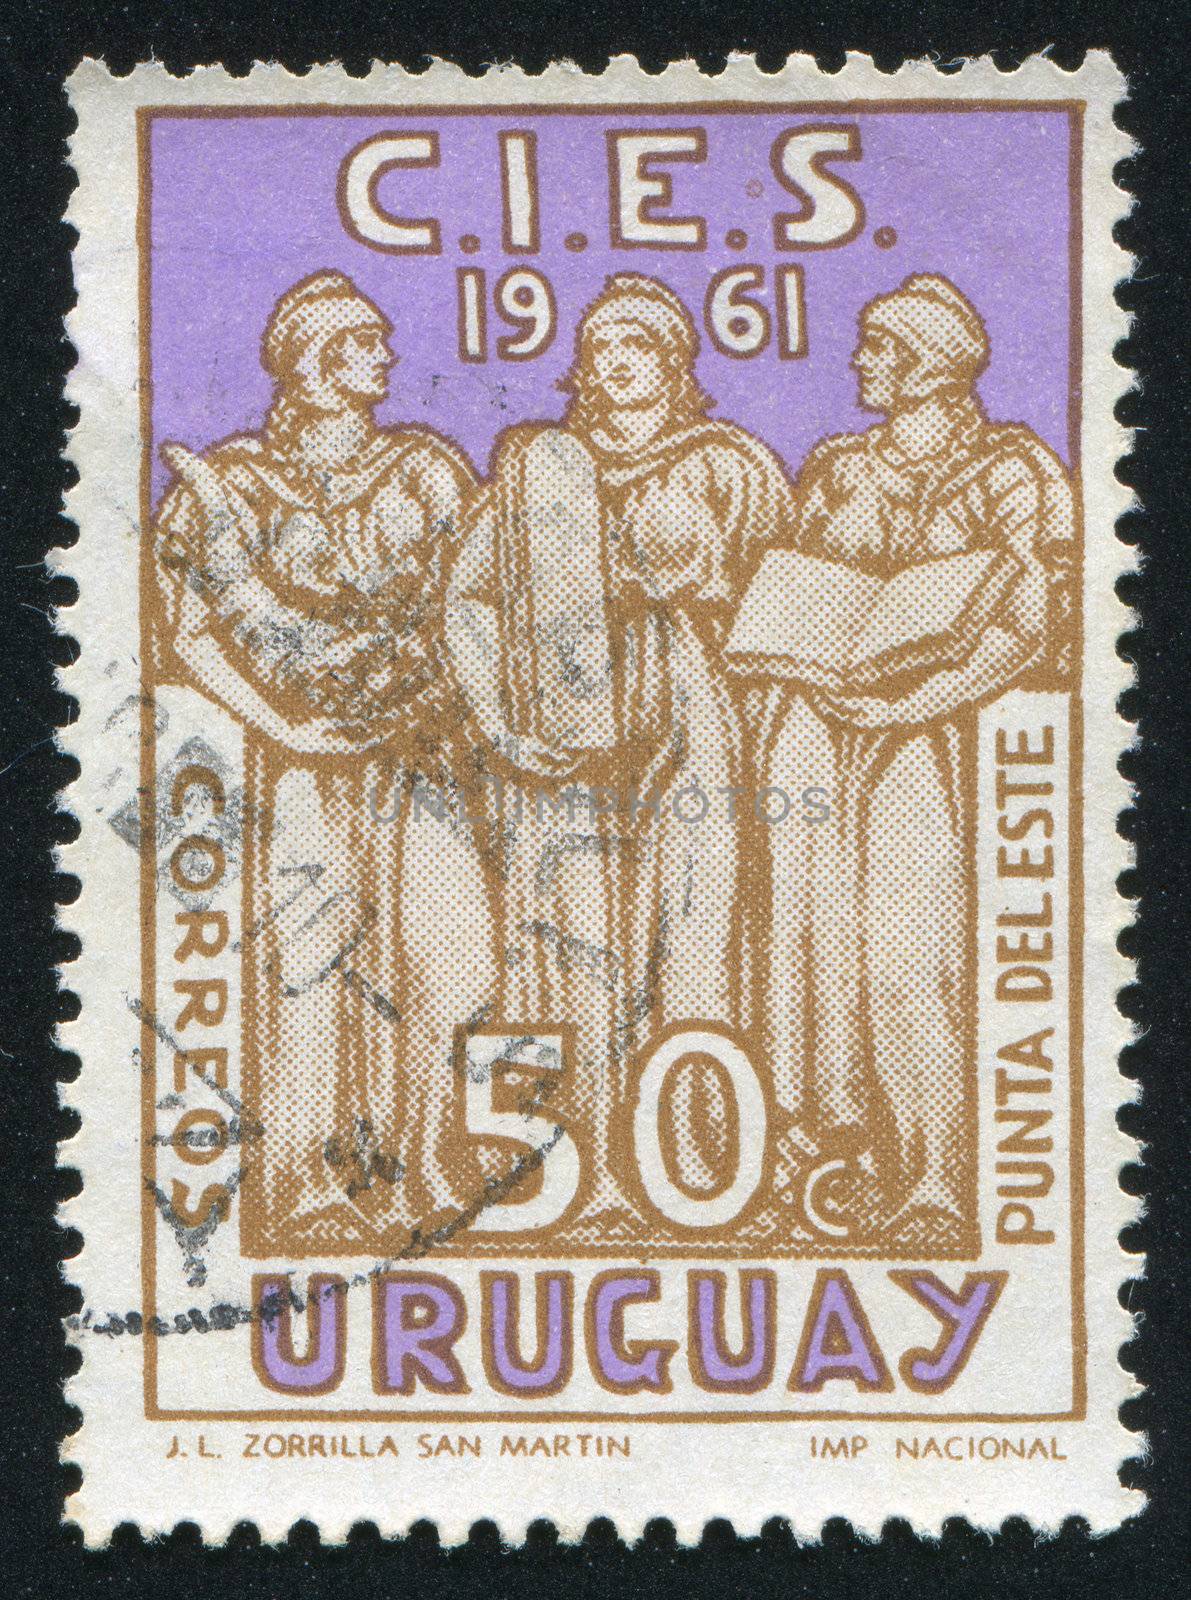 URUGUAY - CIRCA 1961: stamp printed by Uruguay, shows Welfare, Justice and Education, circa 1961